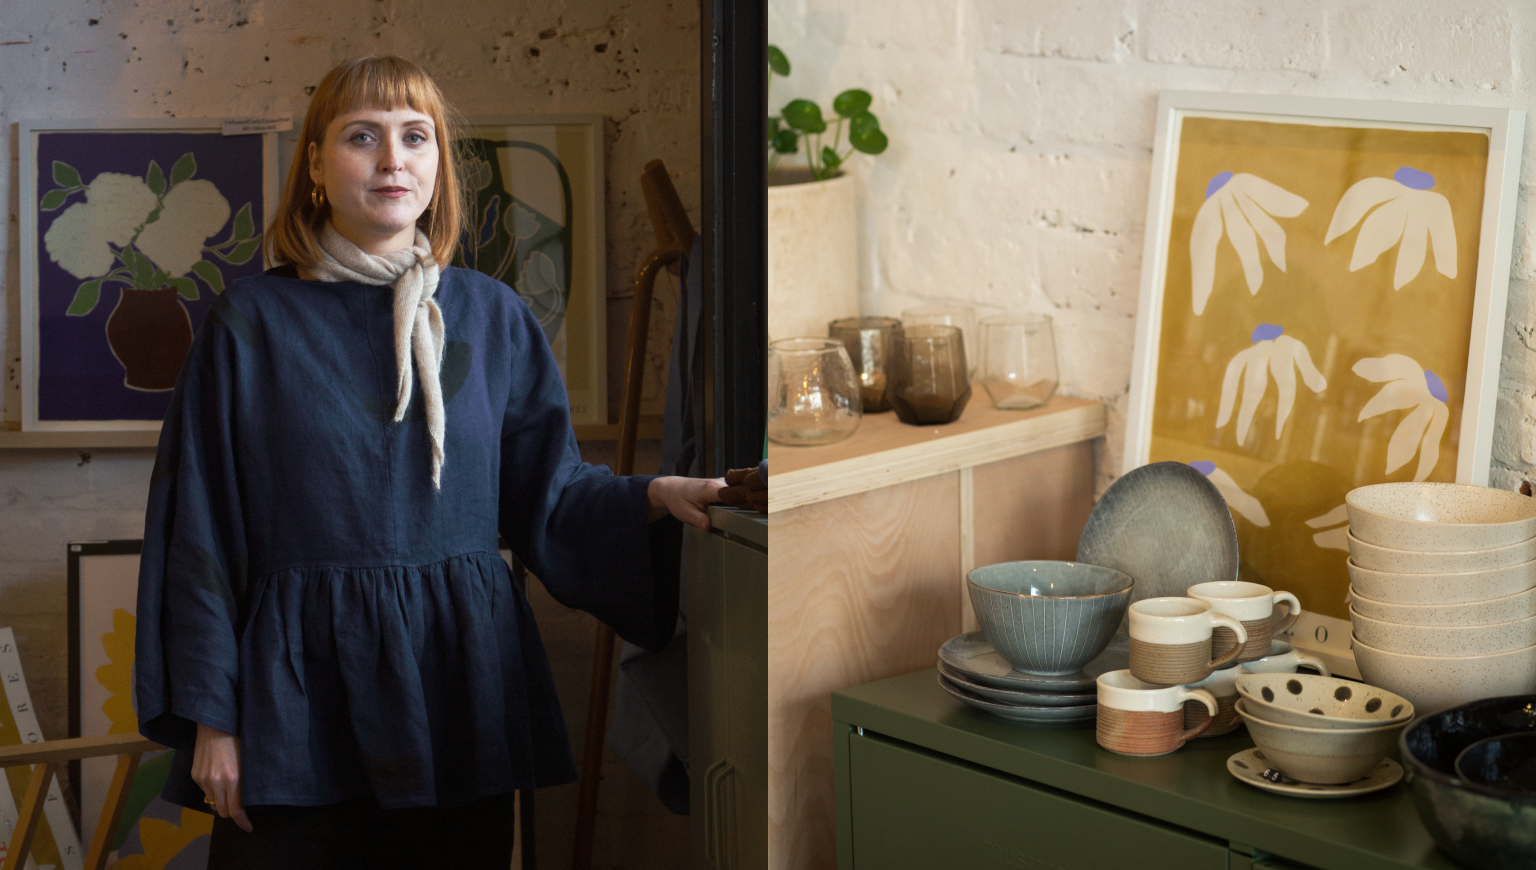 Woman brand owner Ruby from Still Life Story standing next to ceramic dinnerware on shelves